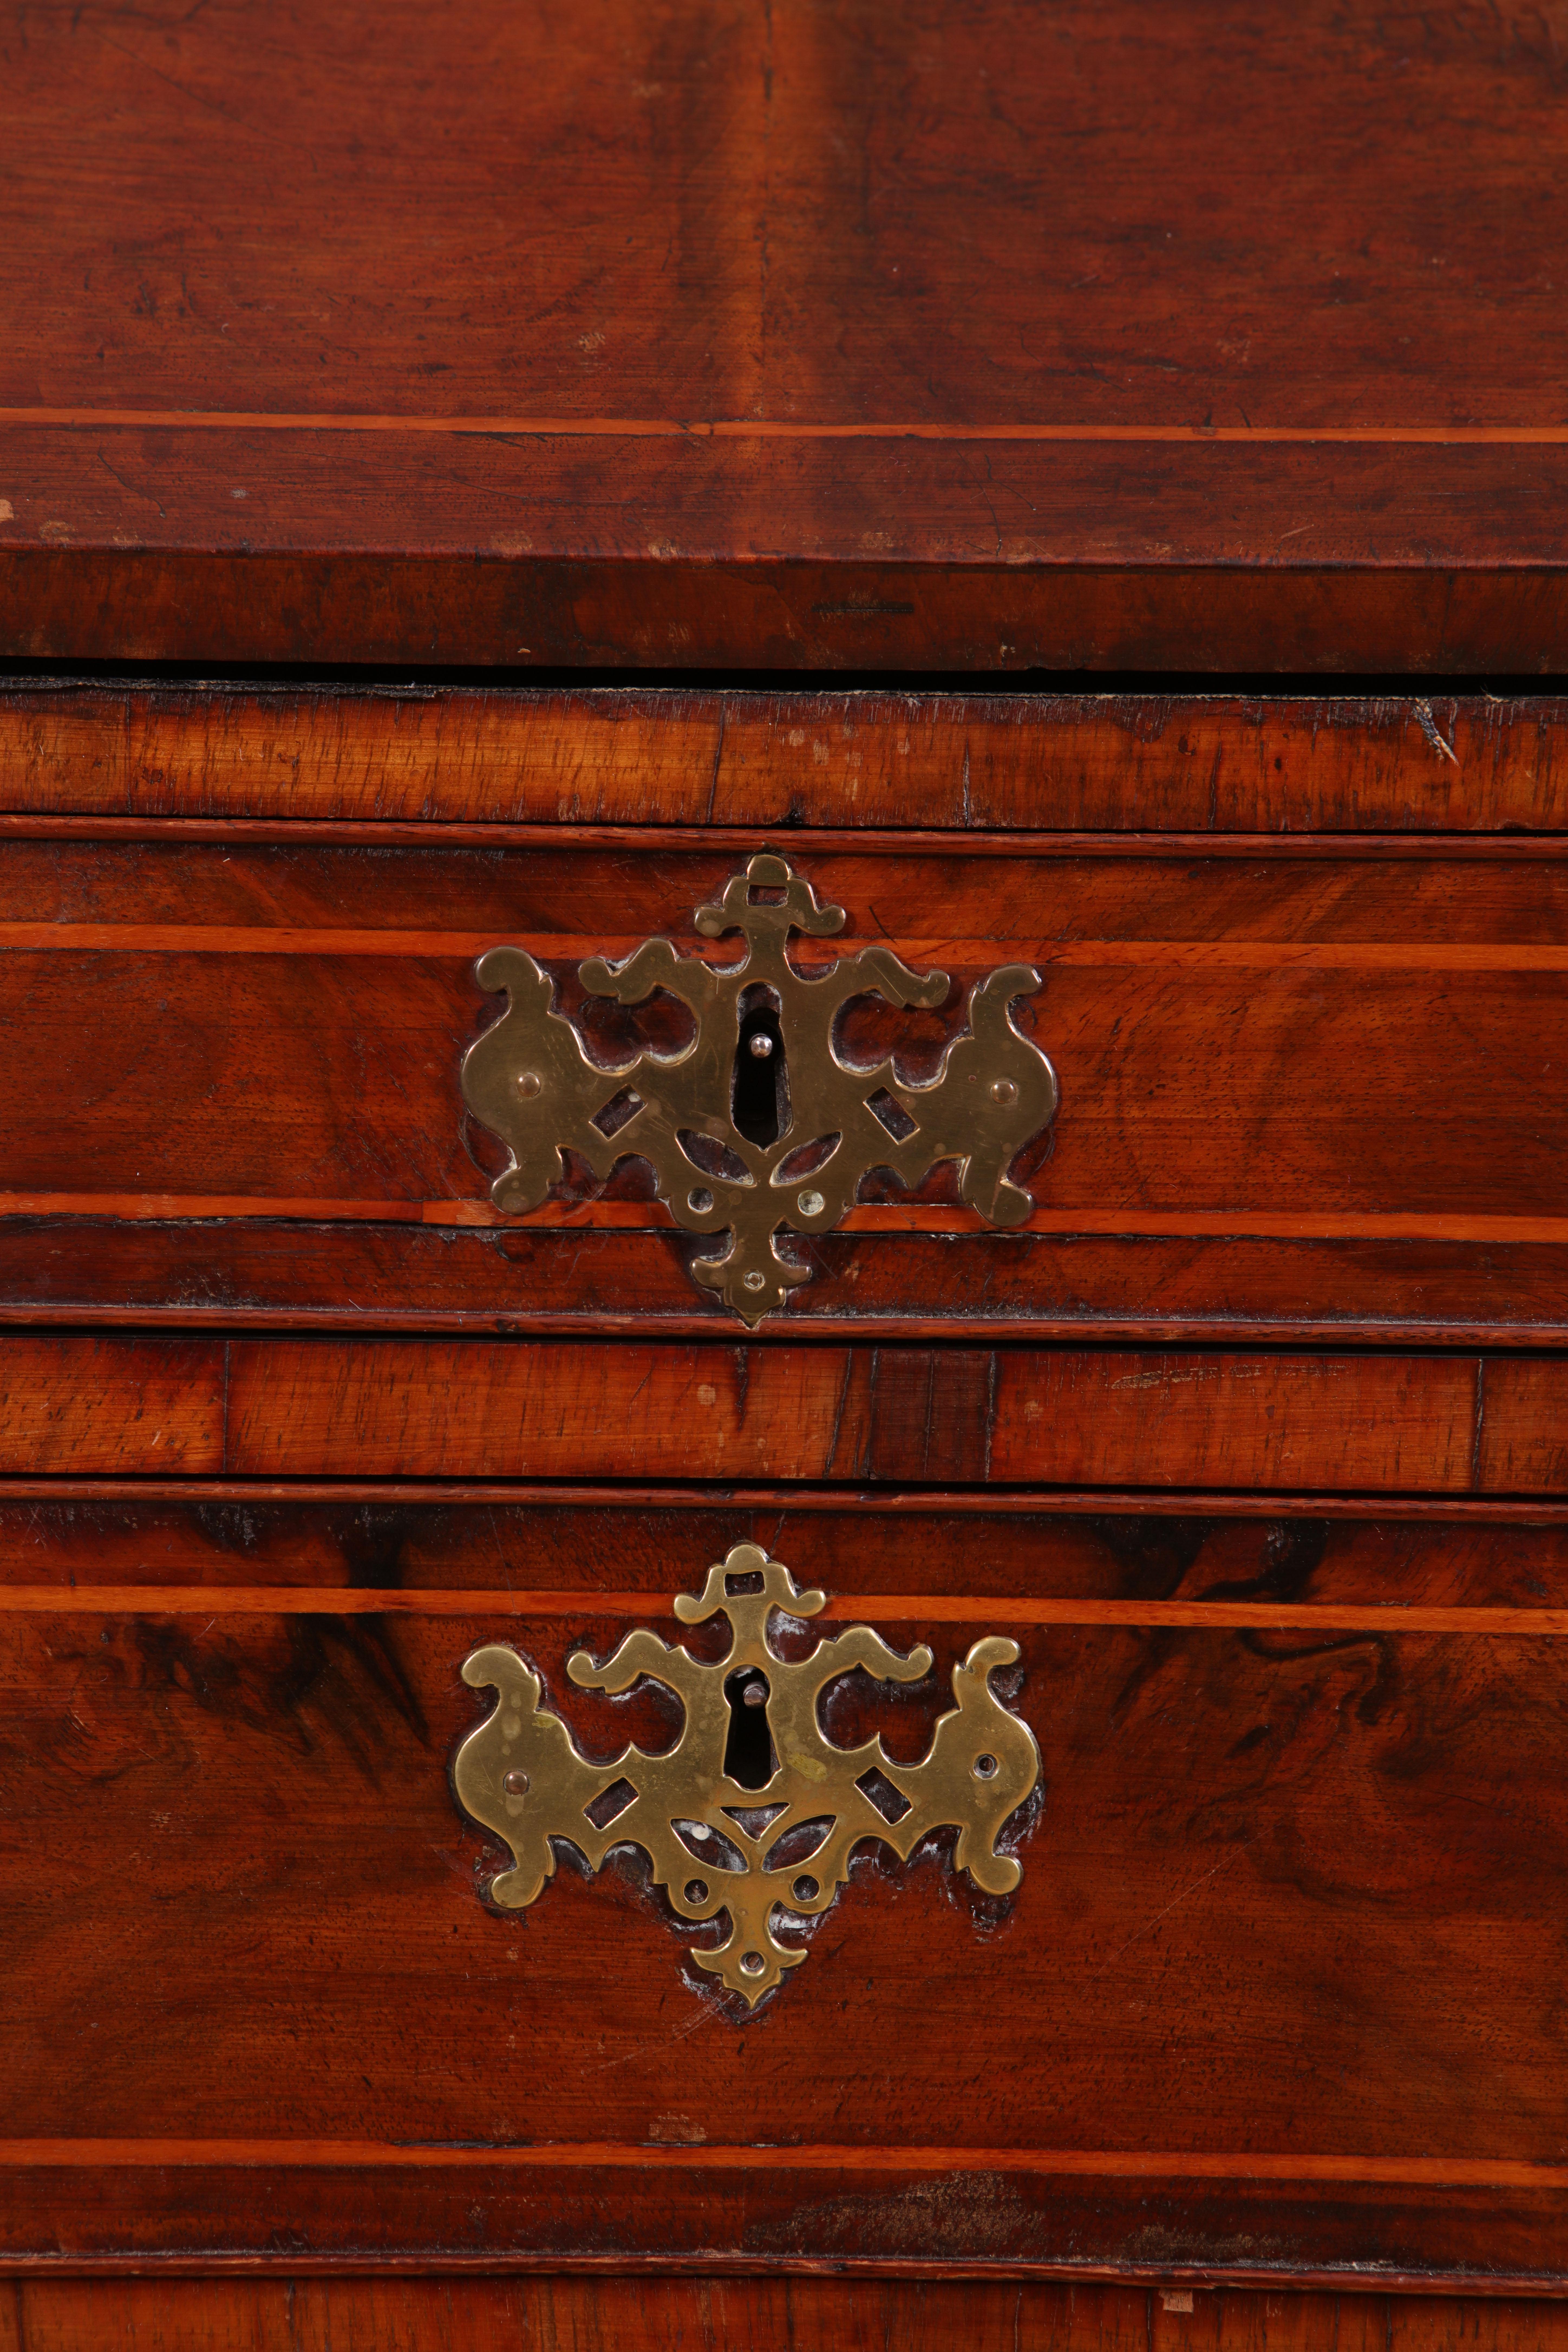 A fine early Georgian walnut secretaire cabinet veneered throughout with book-matched figured walnut. The fall front opening to a fitted interior of drawers and pigeon holes with ogee ornament, the slope resting on pull-out bearers. Below are four